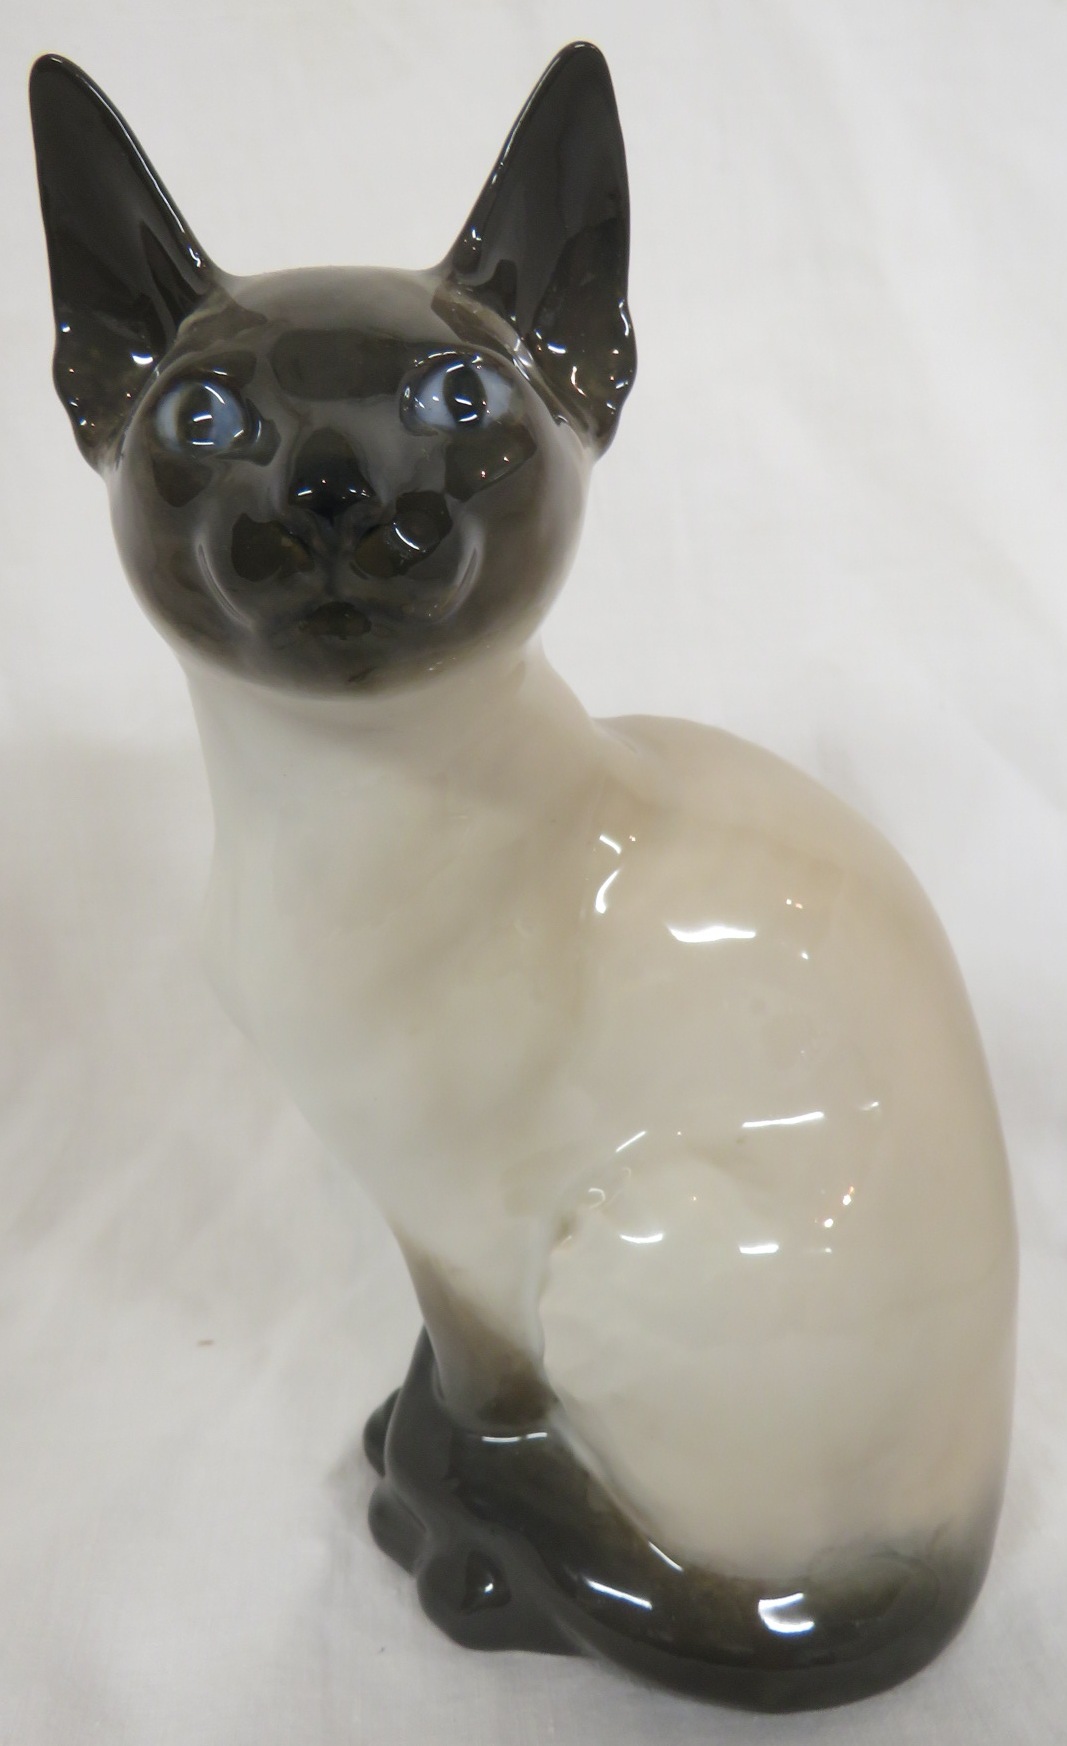 Royal Copenhagen porcelain figure of a seated Siamese cat, numbered 3281 (height 19cm)